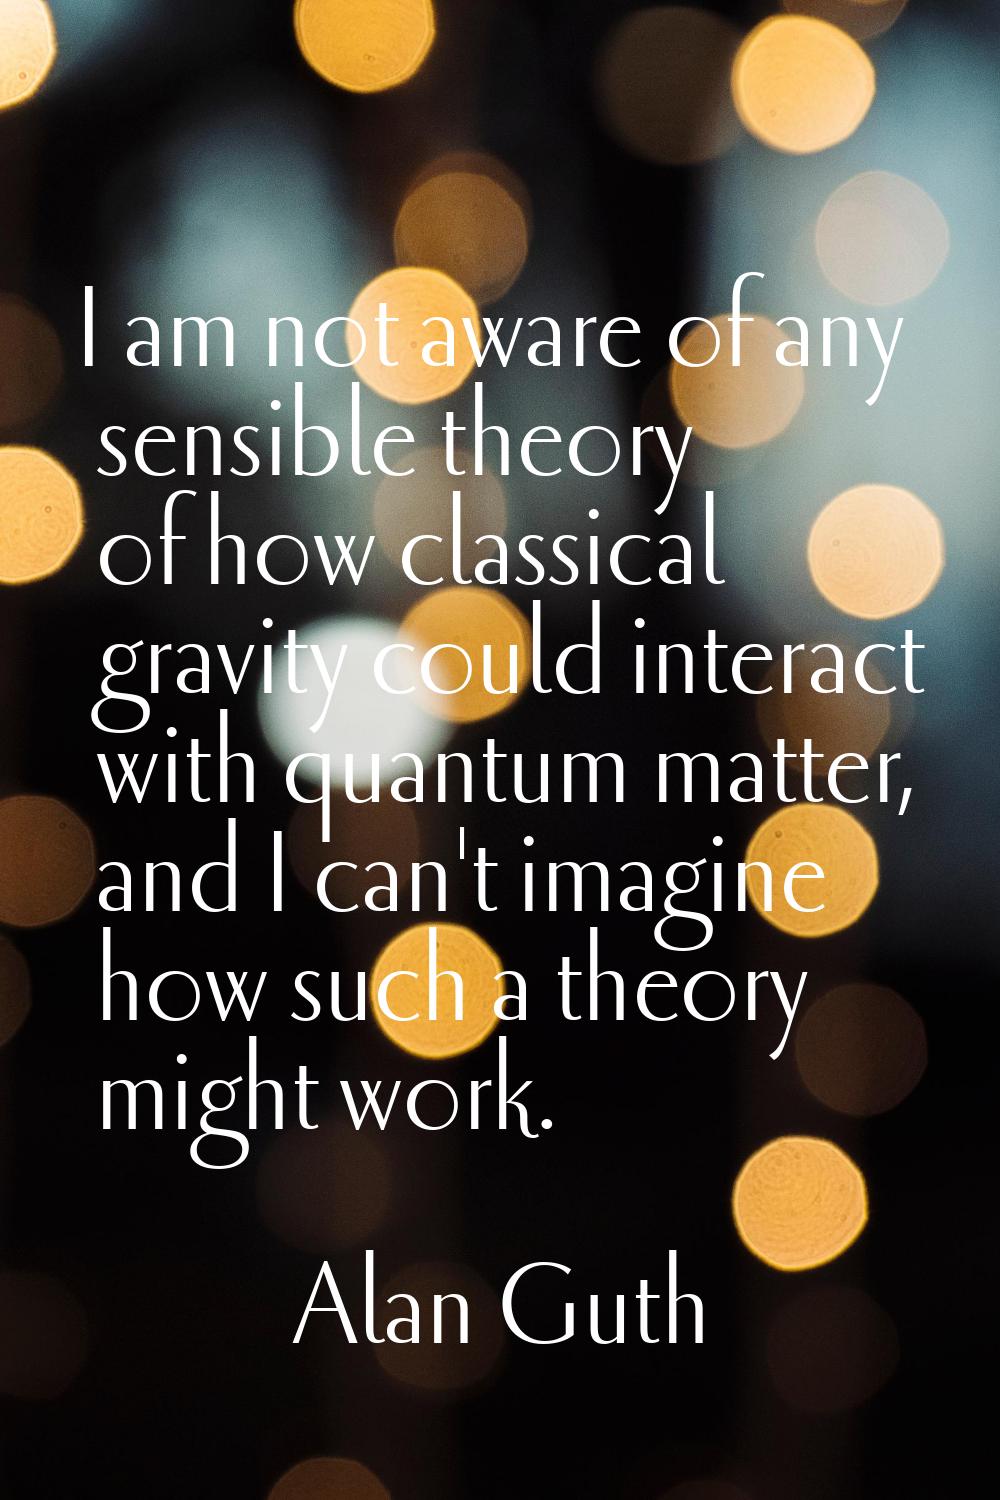 I am not aware of any sensible theory of how classical gravity could interact with quantum matter, 